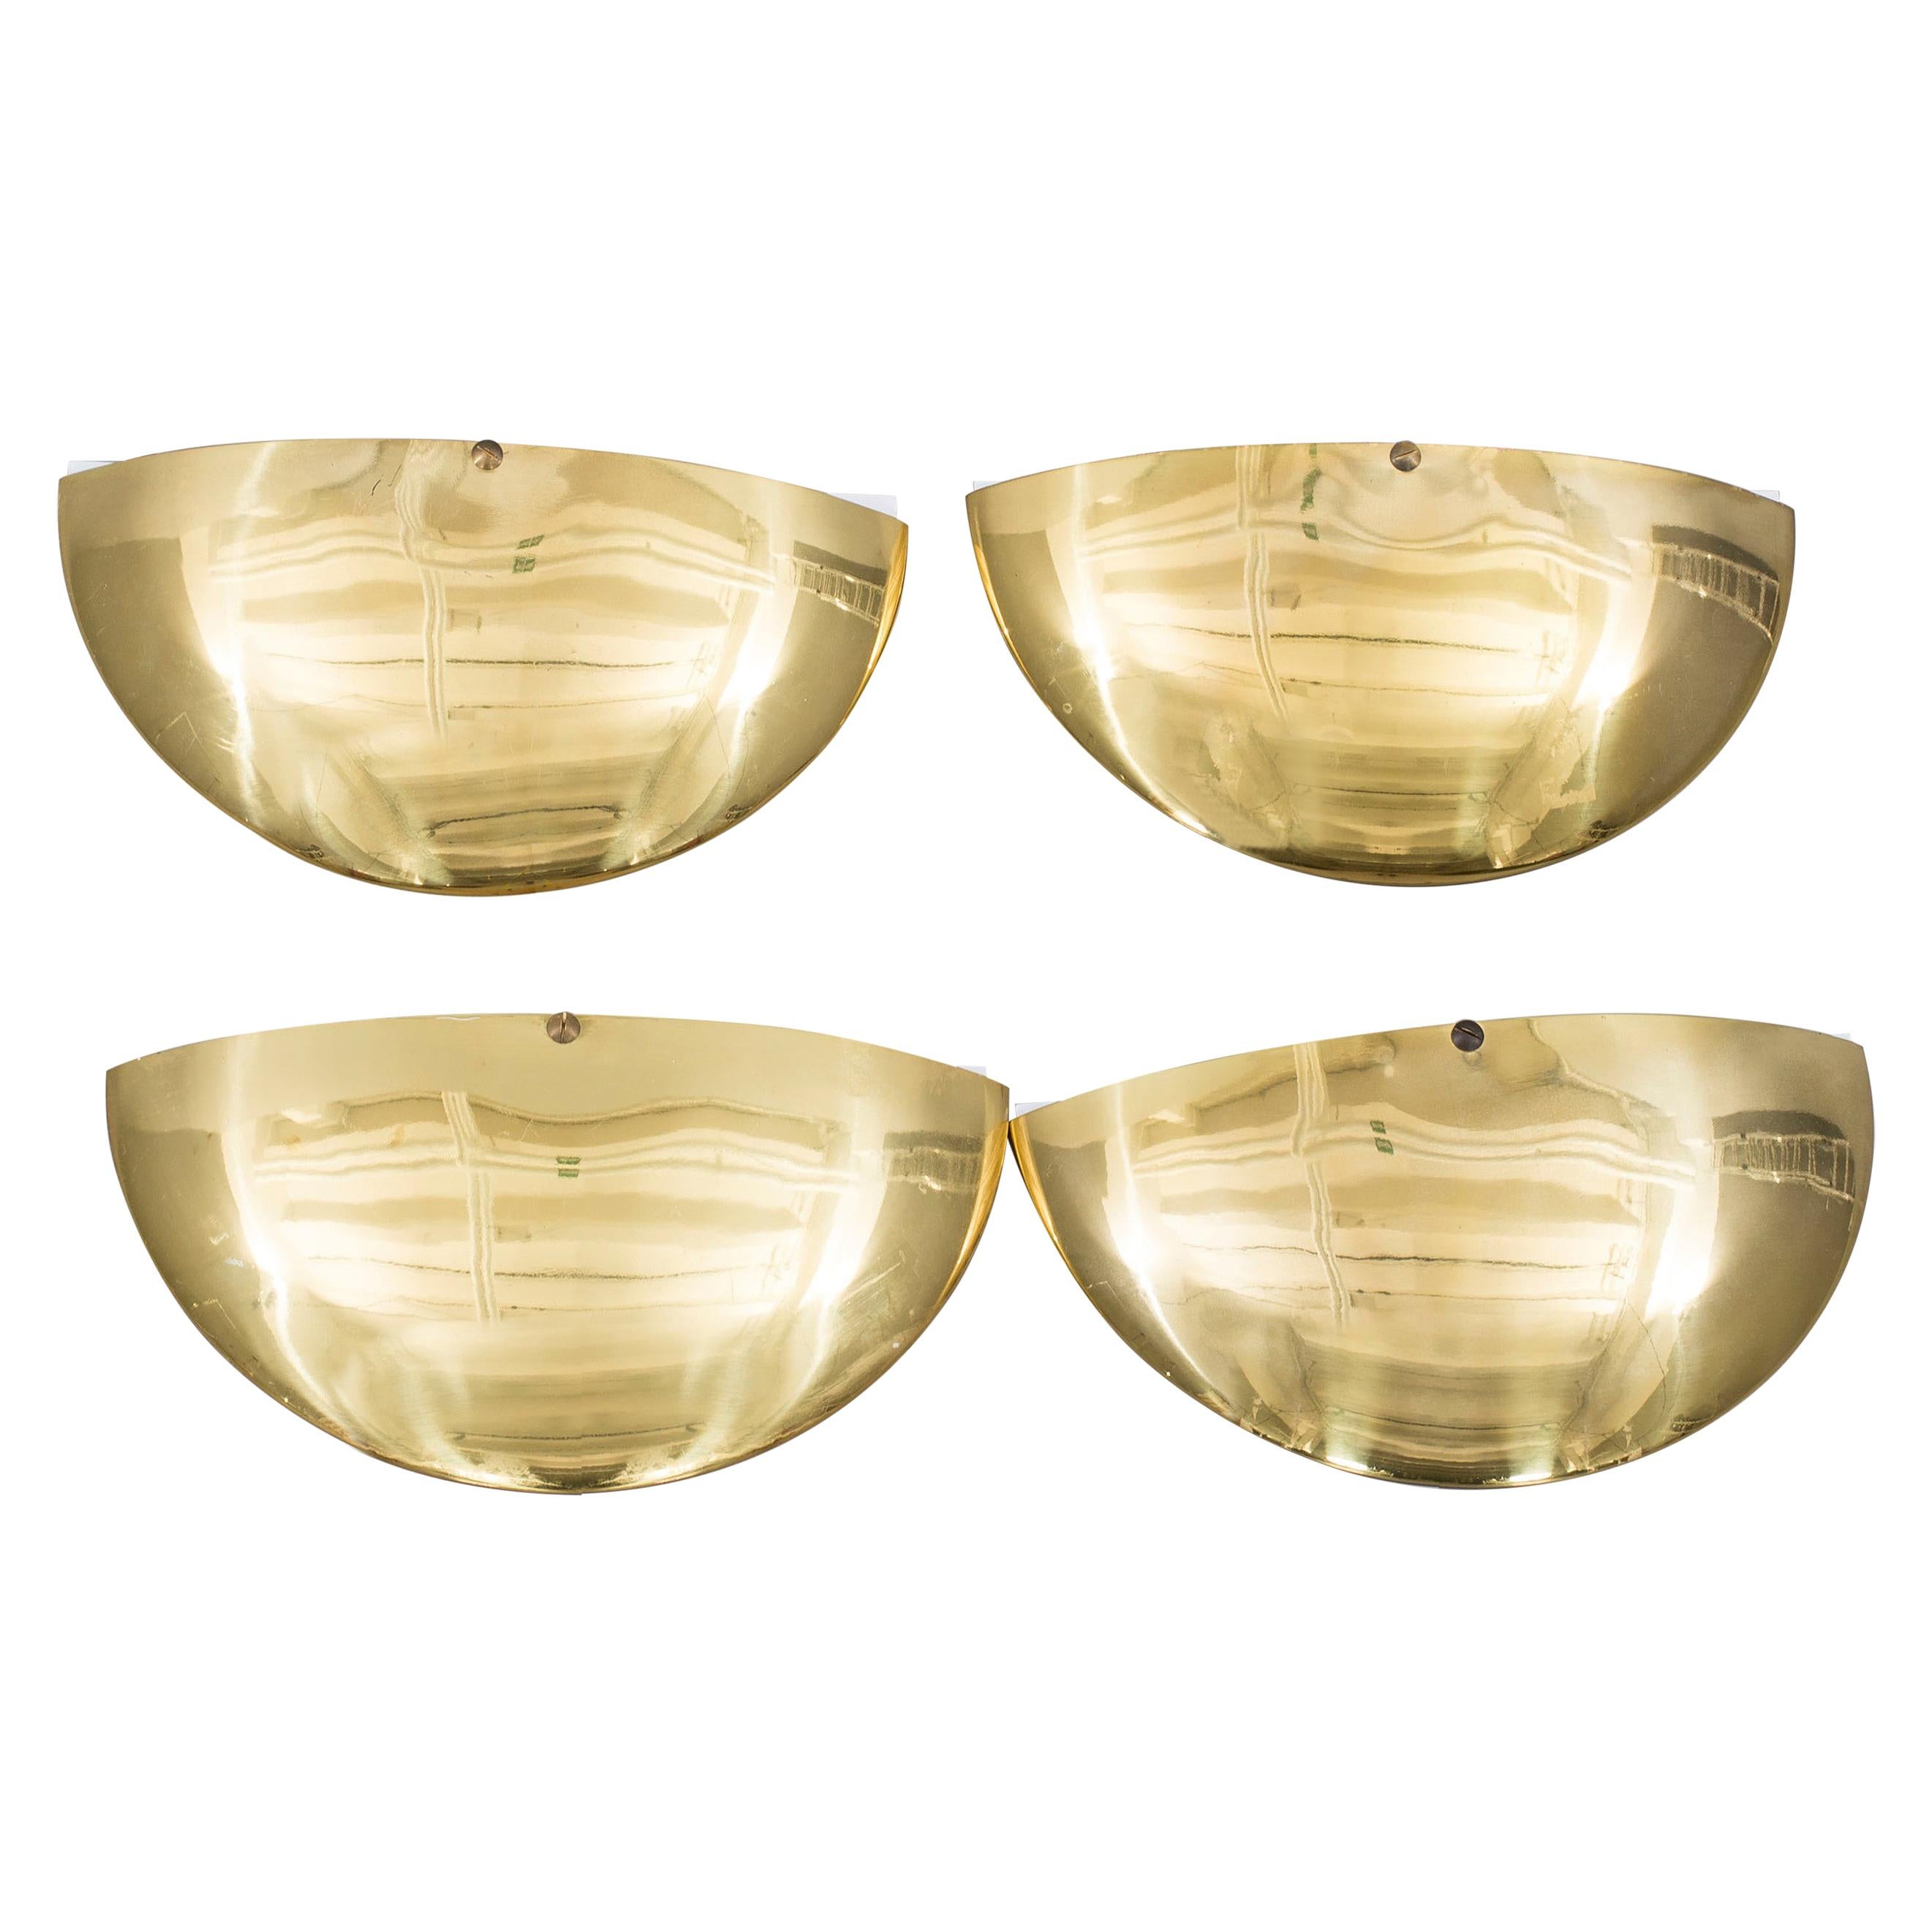 Brass Wall Sconces, Made in Mid-20th Century